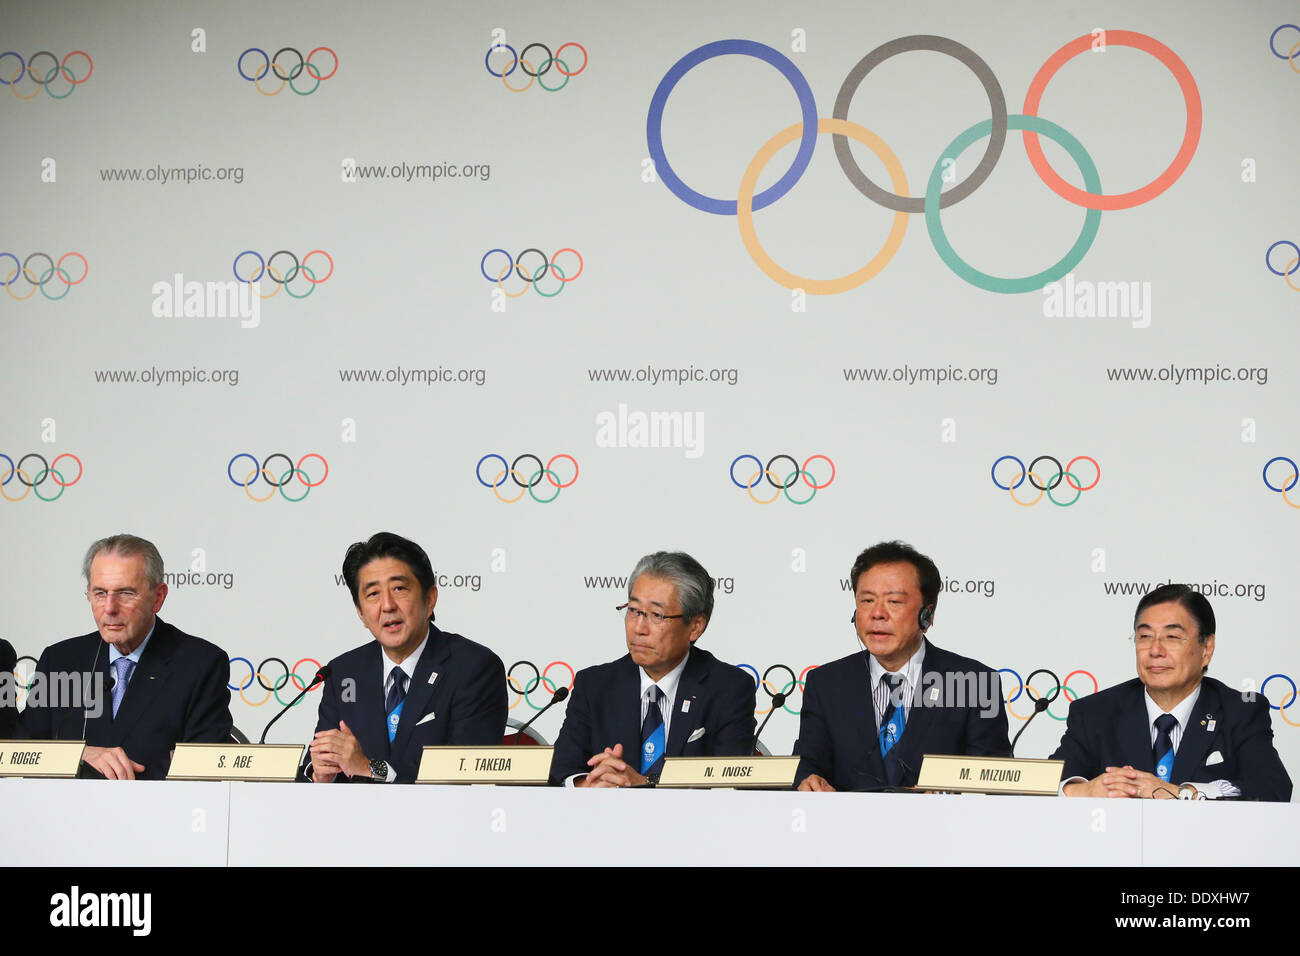 (L to R) Jacques Rogge, Shinzo Abe, Tsunekazu Takeda, Naoki Inose, Masato Mizuno, SEPTEMBER 7, 2013 : A press conference after Tokyo was announced as the winning city bid for the 2020 Summer Olympic Games at the 125th International Olympic Committee (IOC) session in Buenos Aires Argentina, on Saturday September 7, 2013. © YUTAKA/AFLO SPORT/Alamy Live News Stock Photo